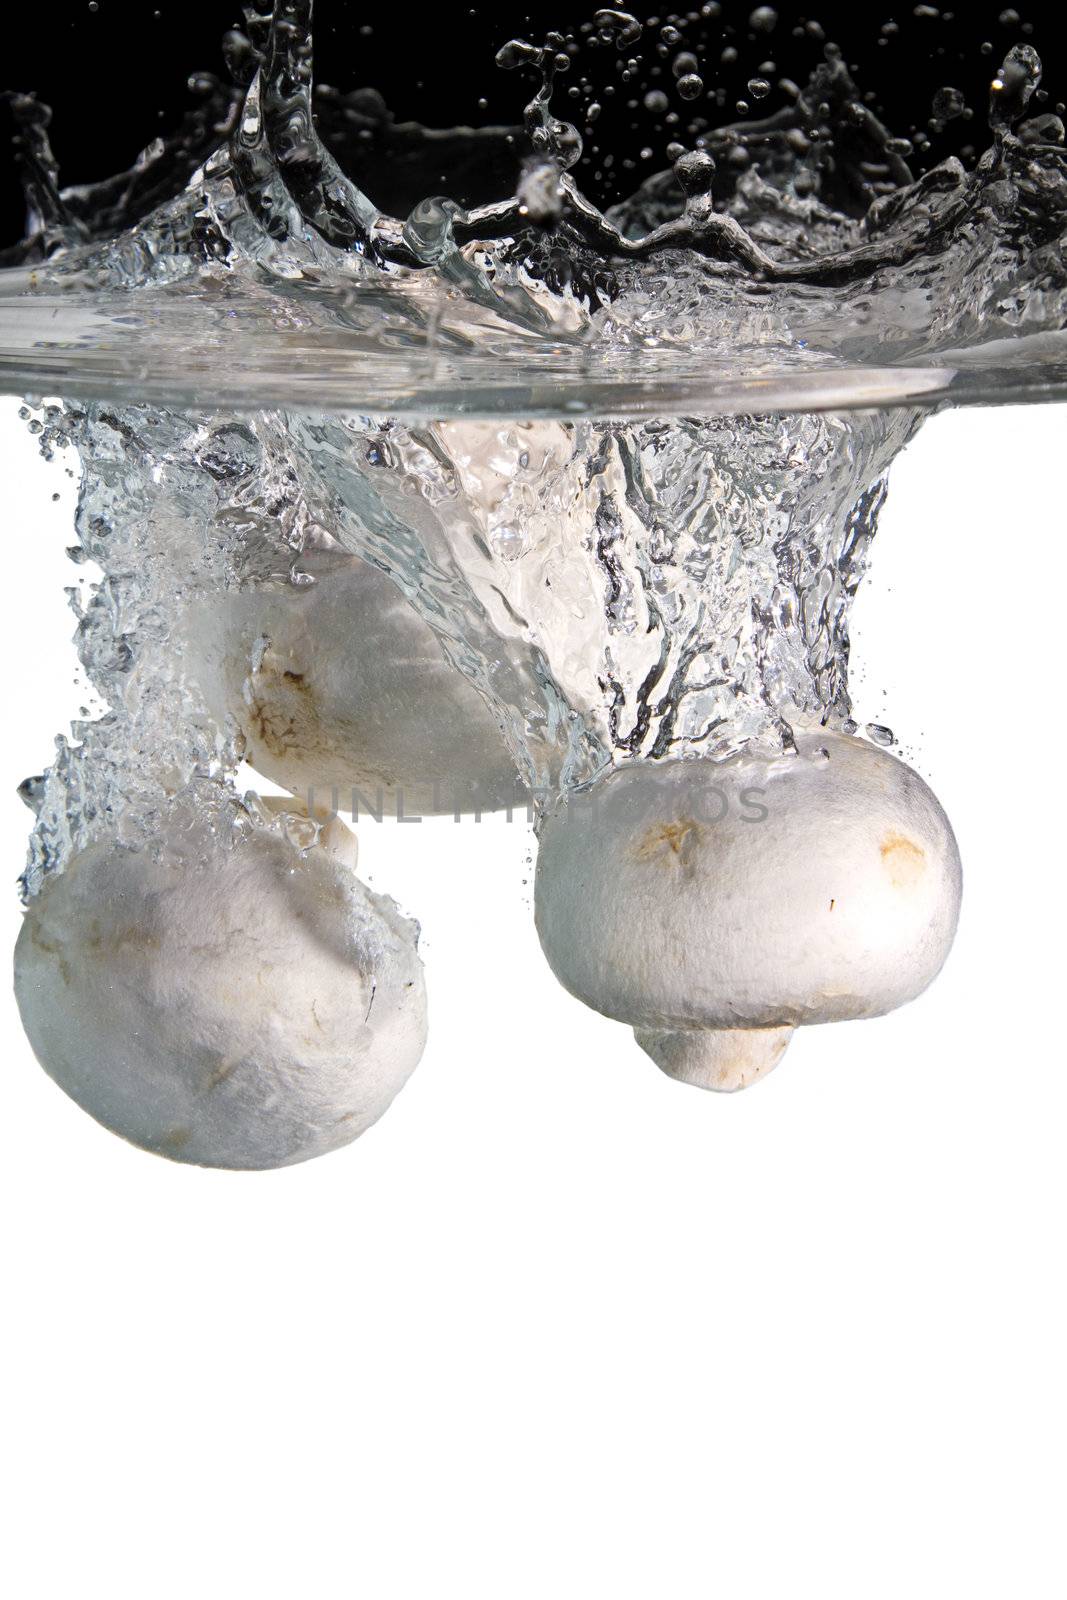 some mushrooms thrown in water with black and white background